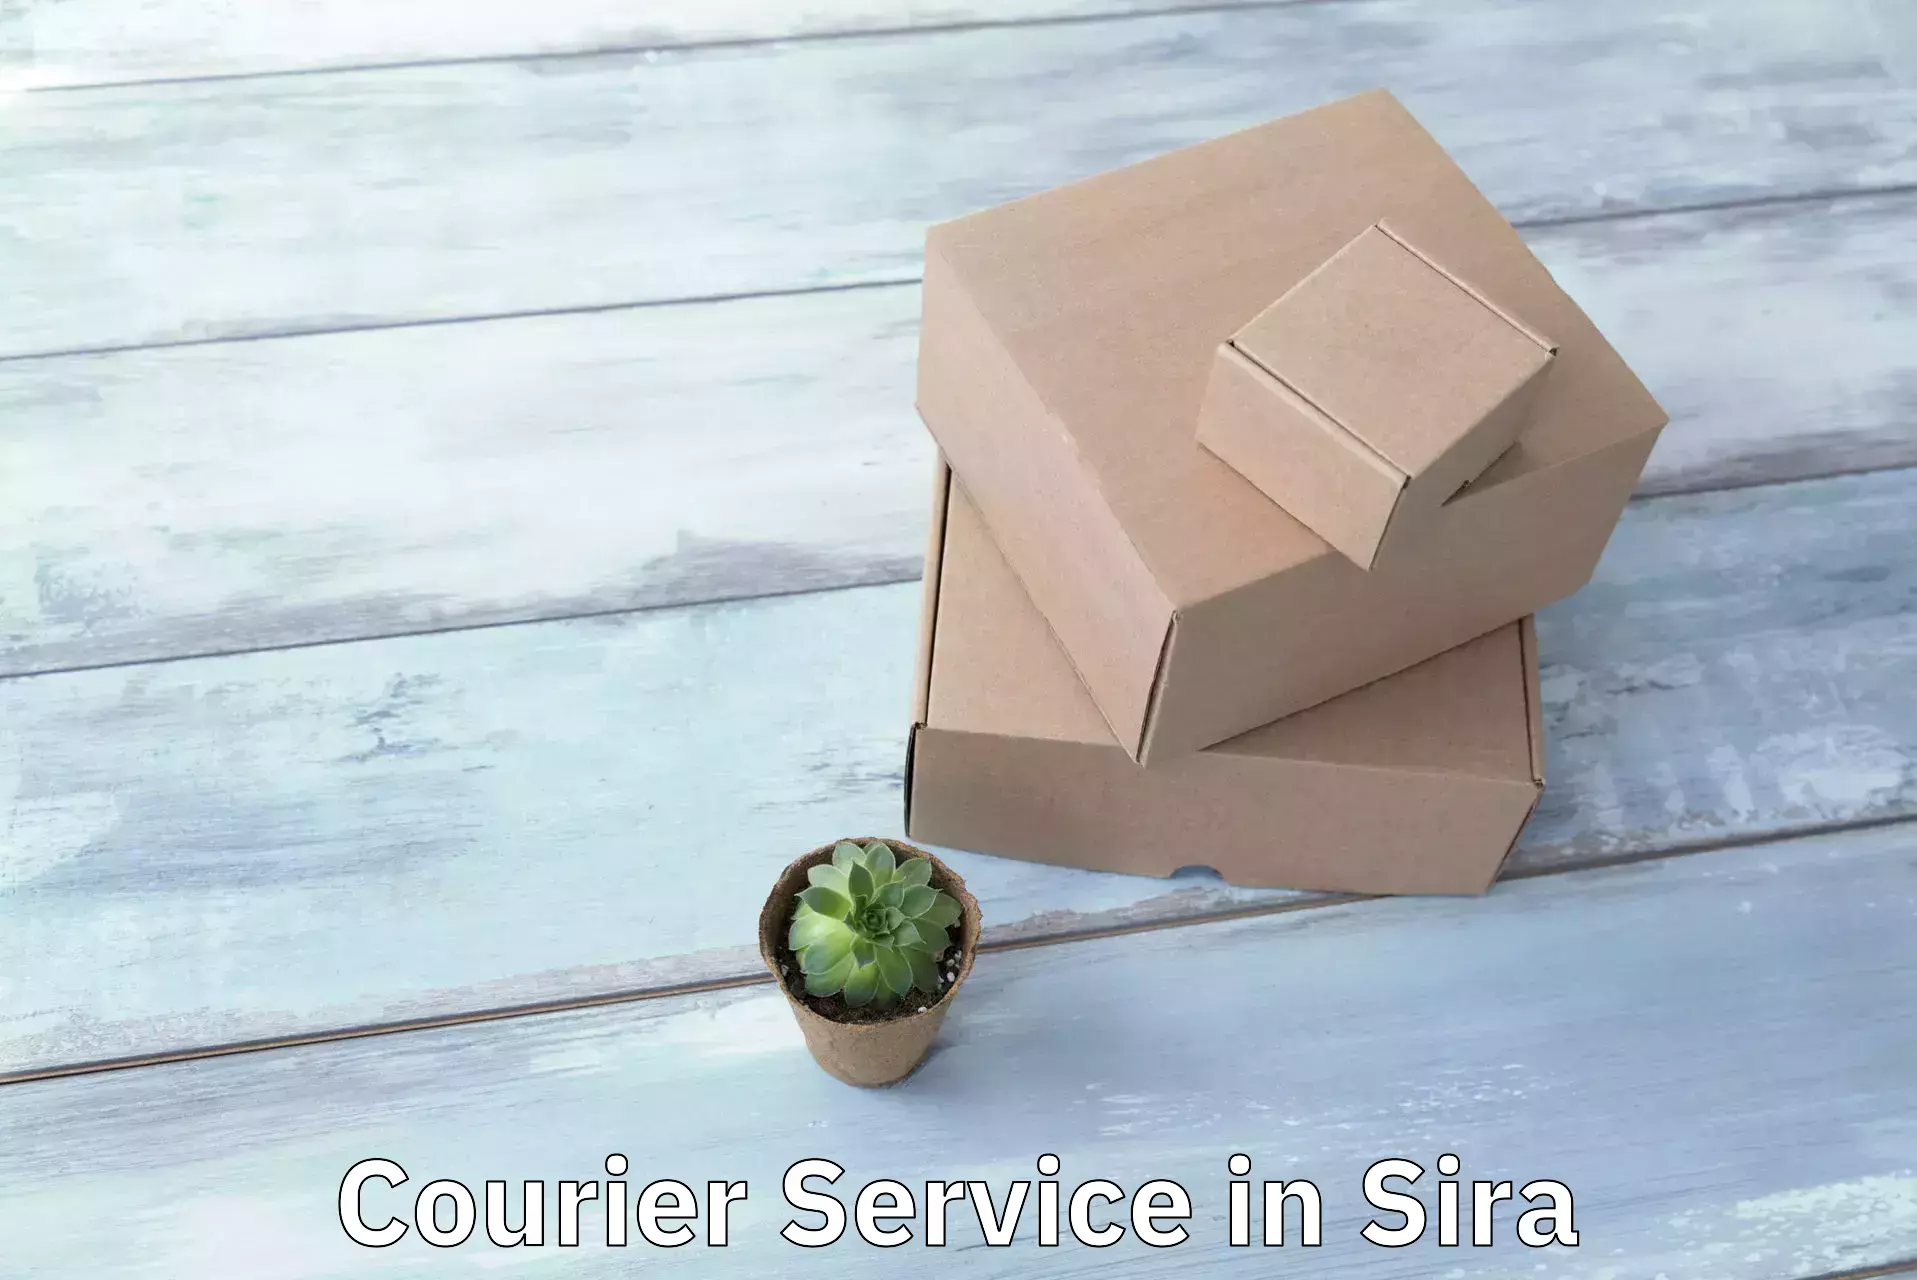 Business delivery service in Sira